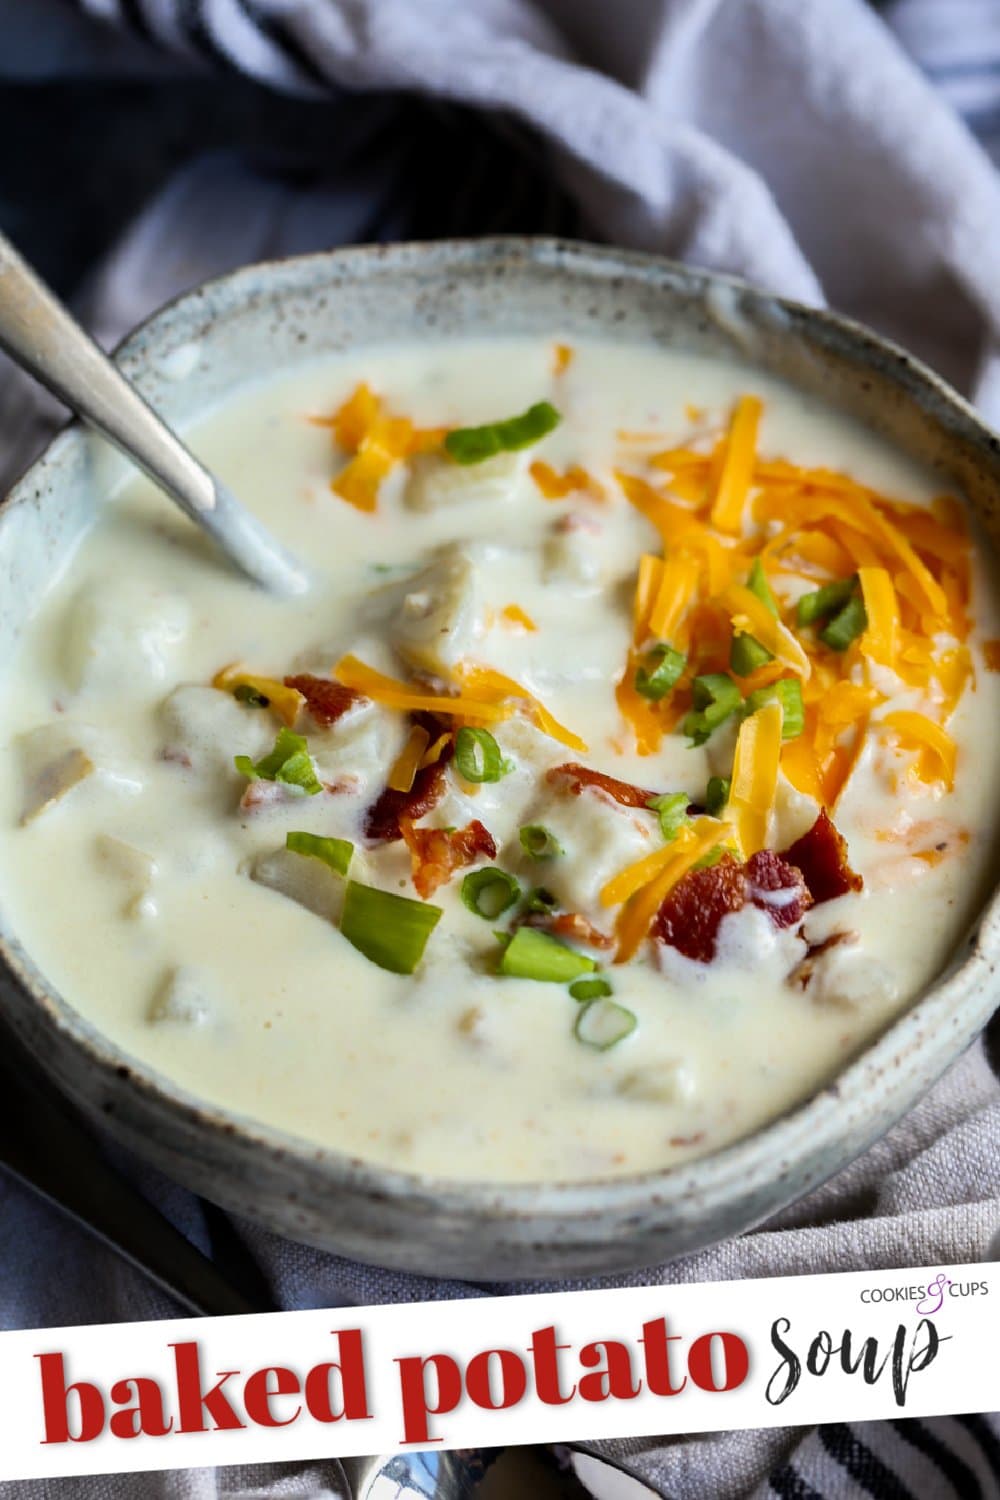 Bowl of baked potato soup with bacon bits.